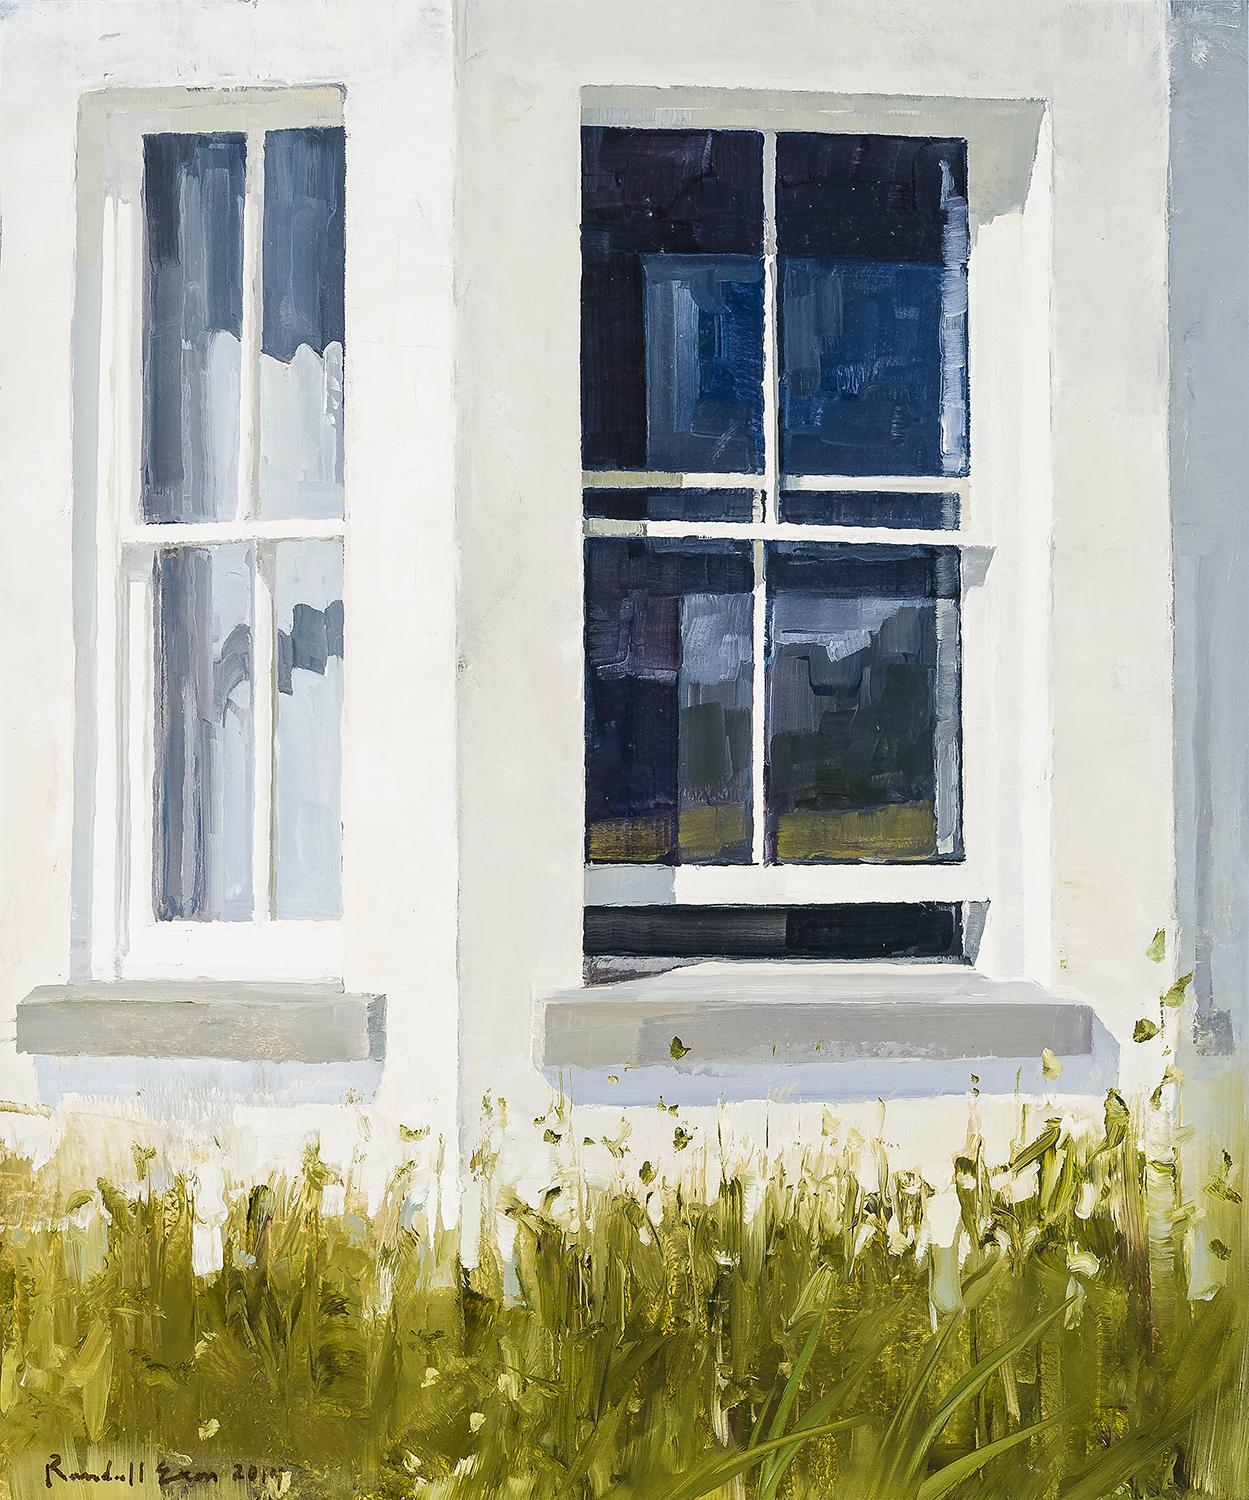 Untitled  - Painting by Randall Exon